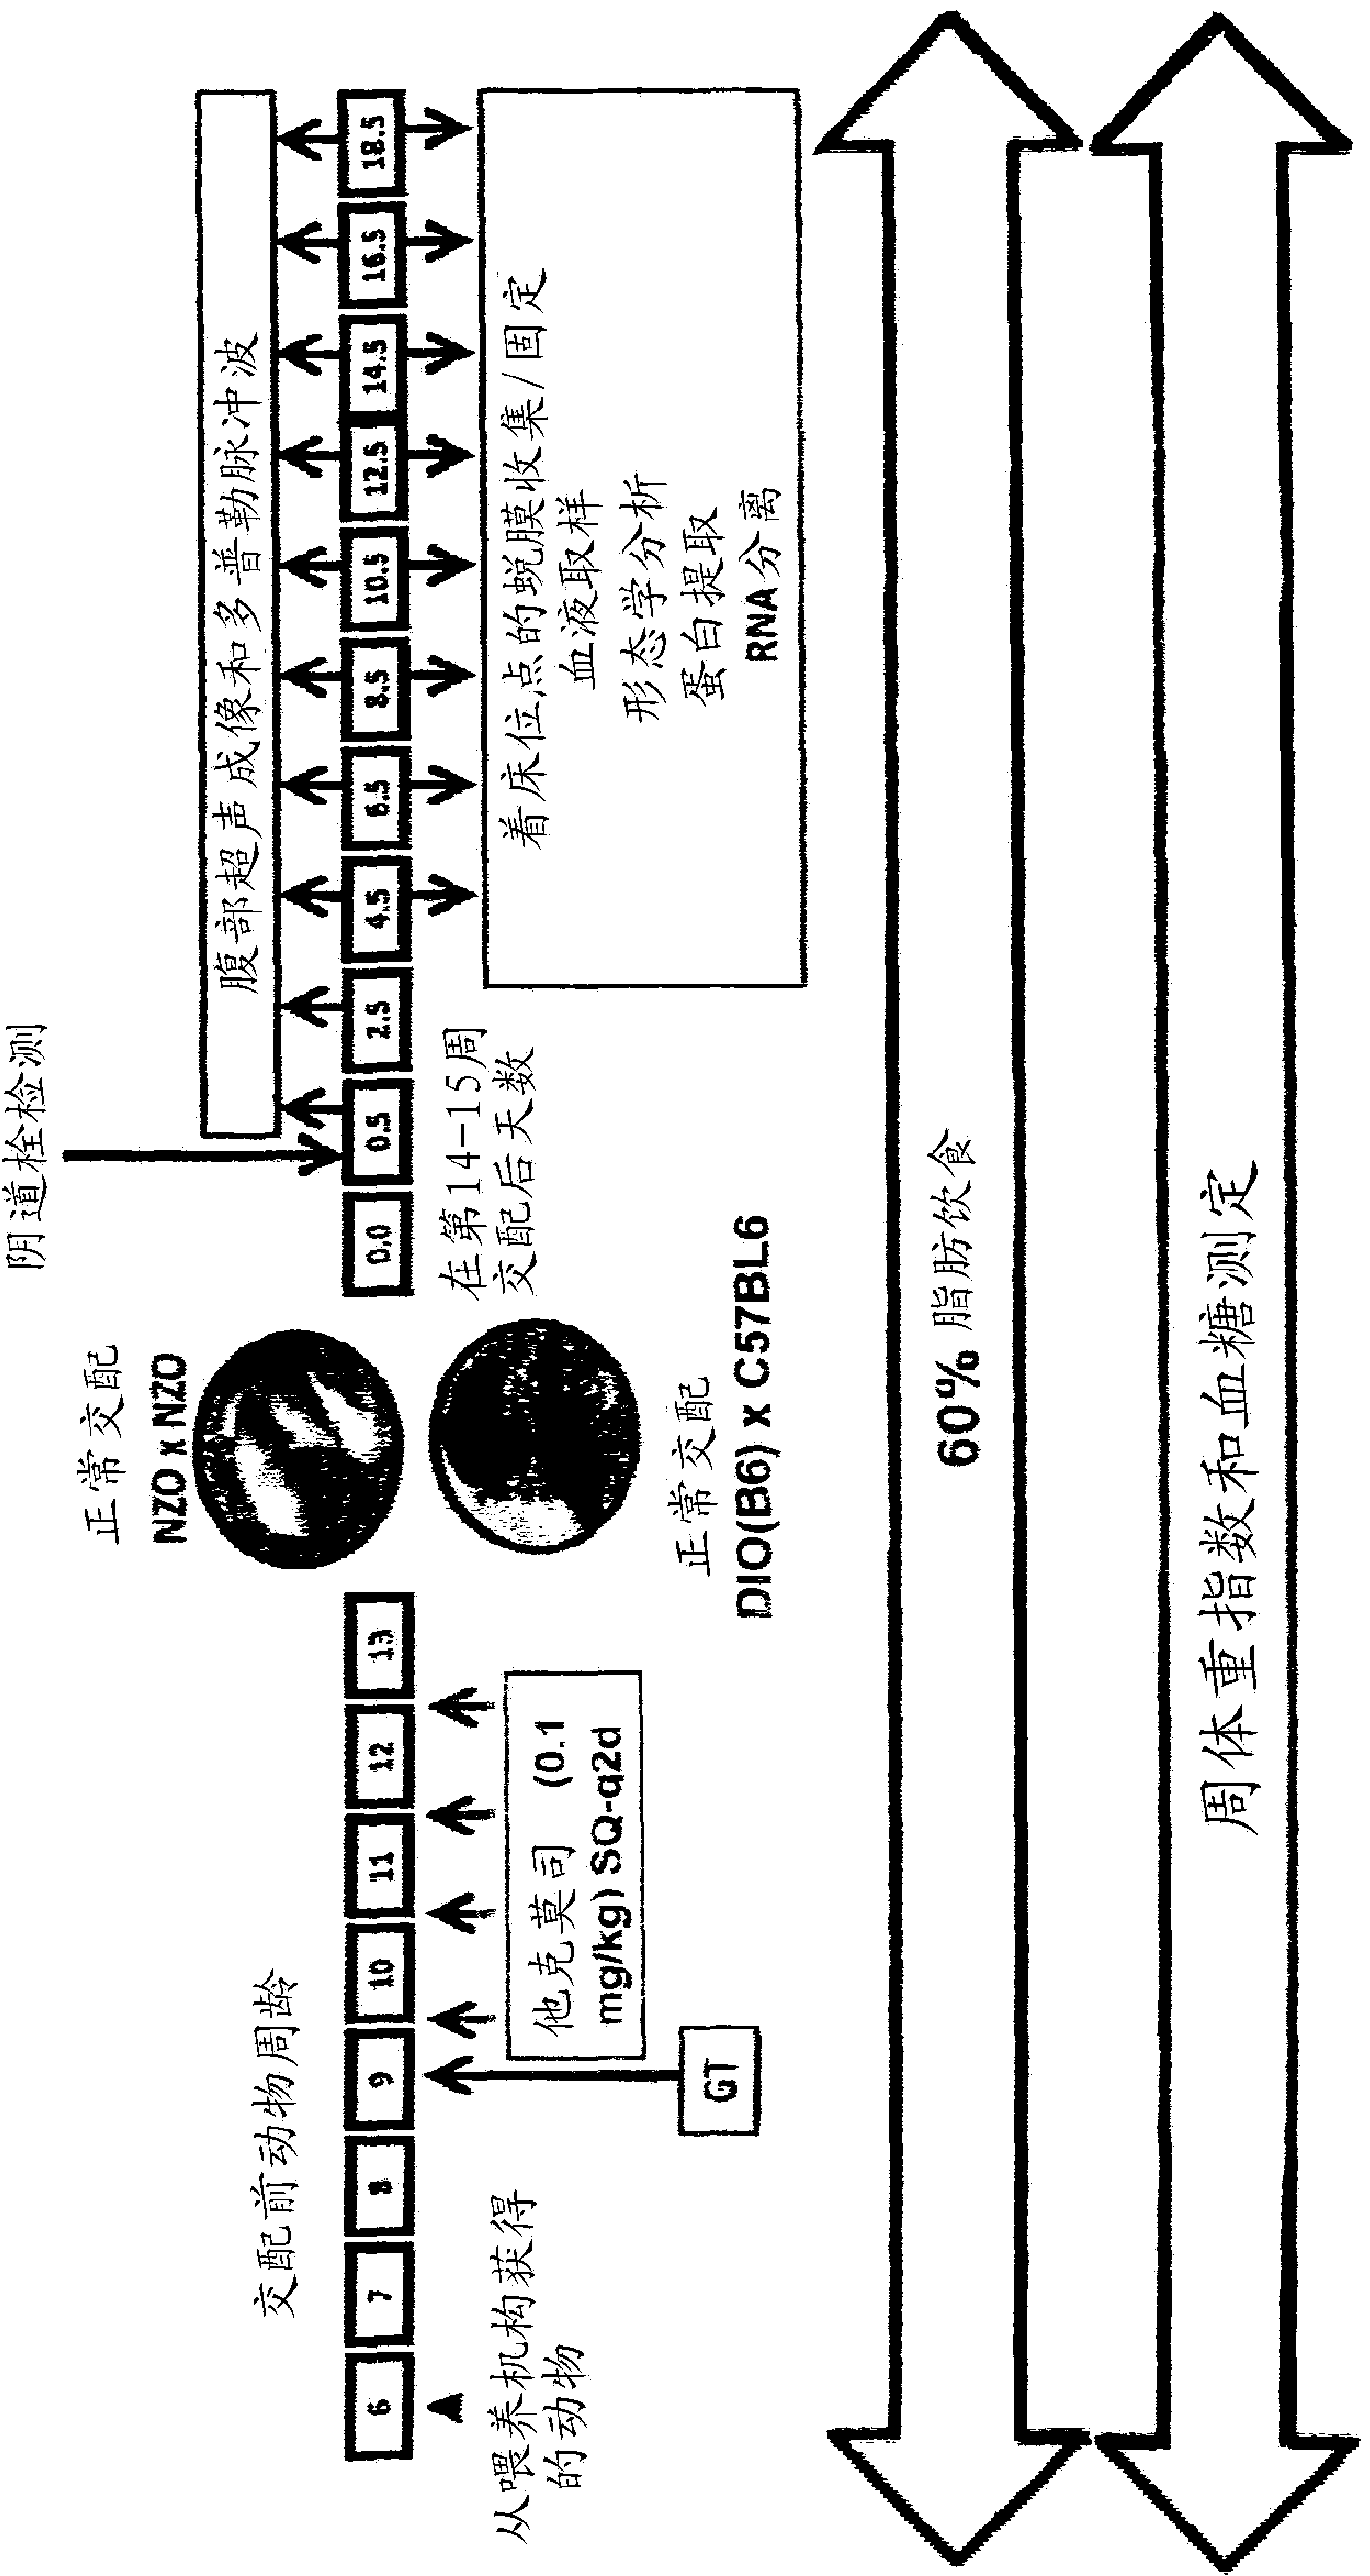 Methods and compositions for enhancing fertility and/or inhibiting pregnancy failure and restoring glucose tolerance